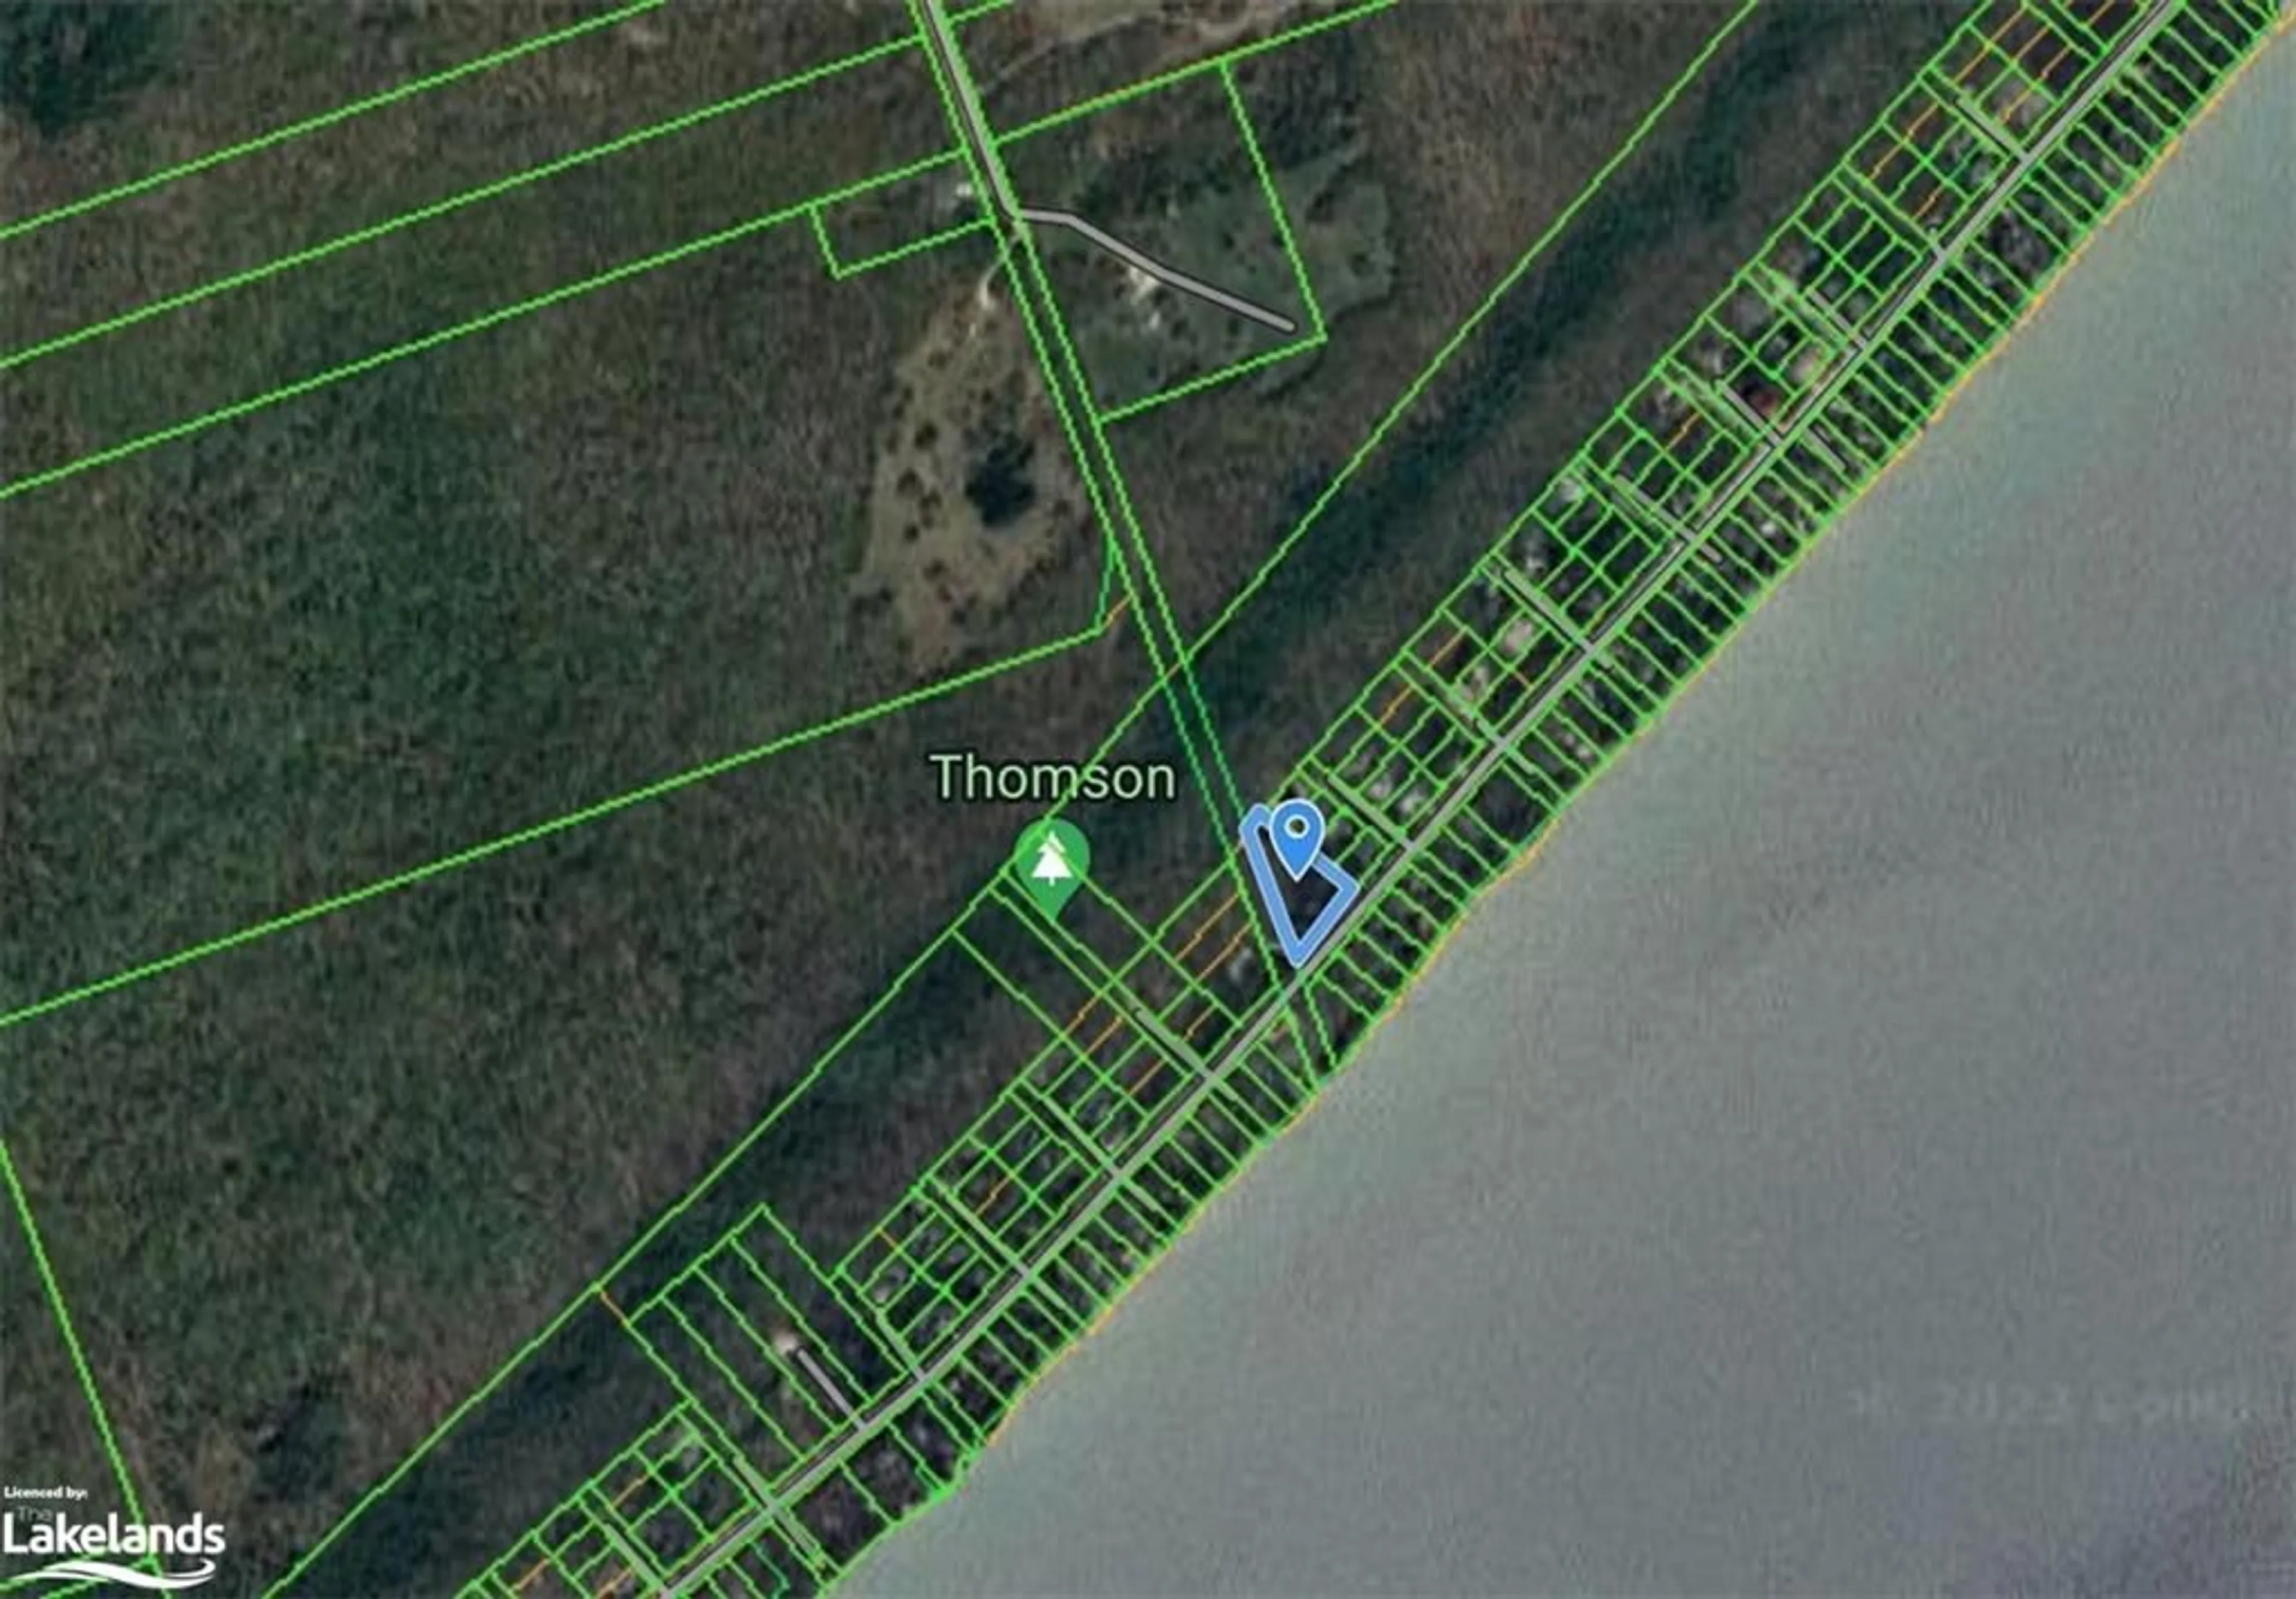 Street view for LOT 191-193 Mallory Beach Rd, South Bruce Peninsula Ontario N0H 2T0